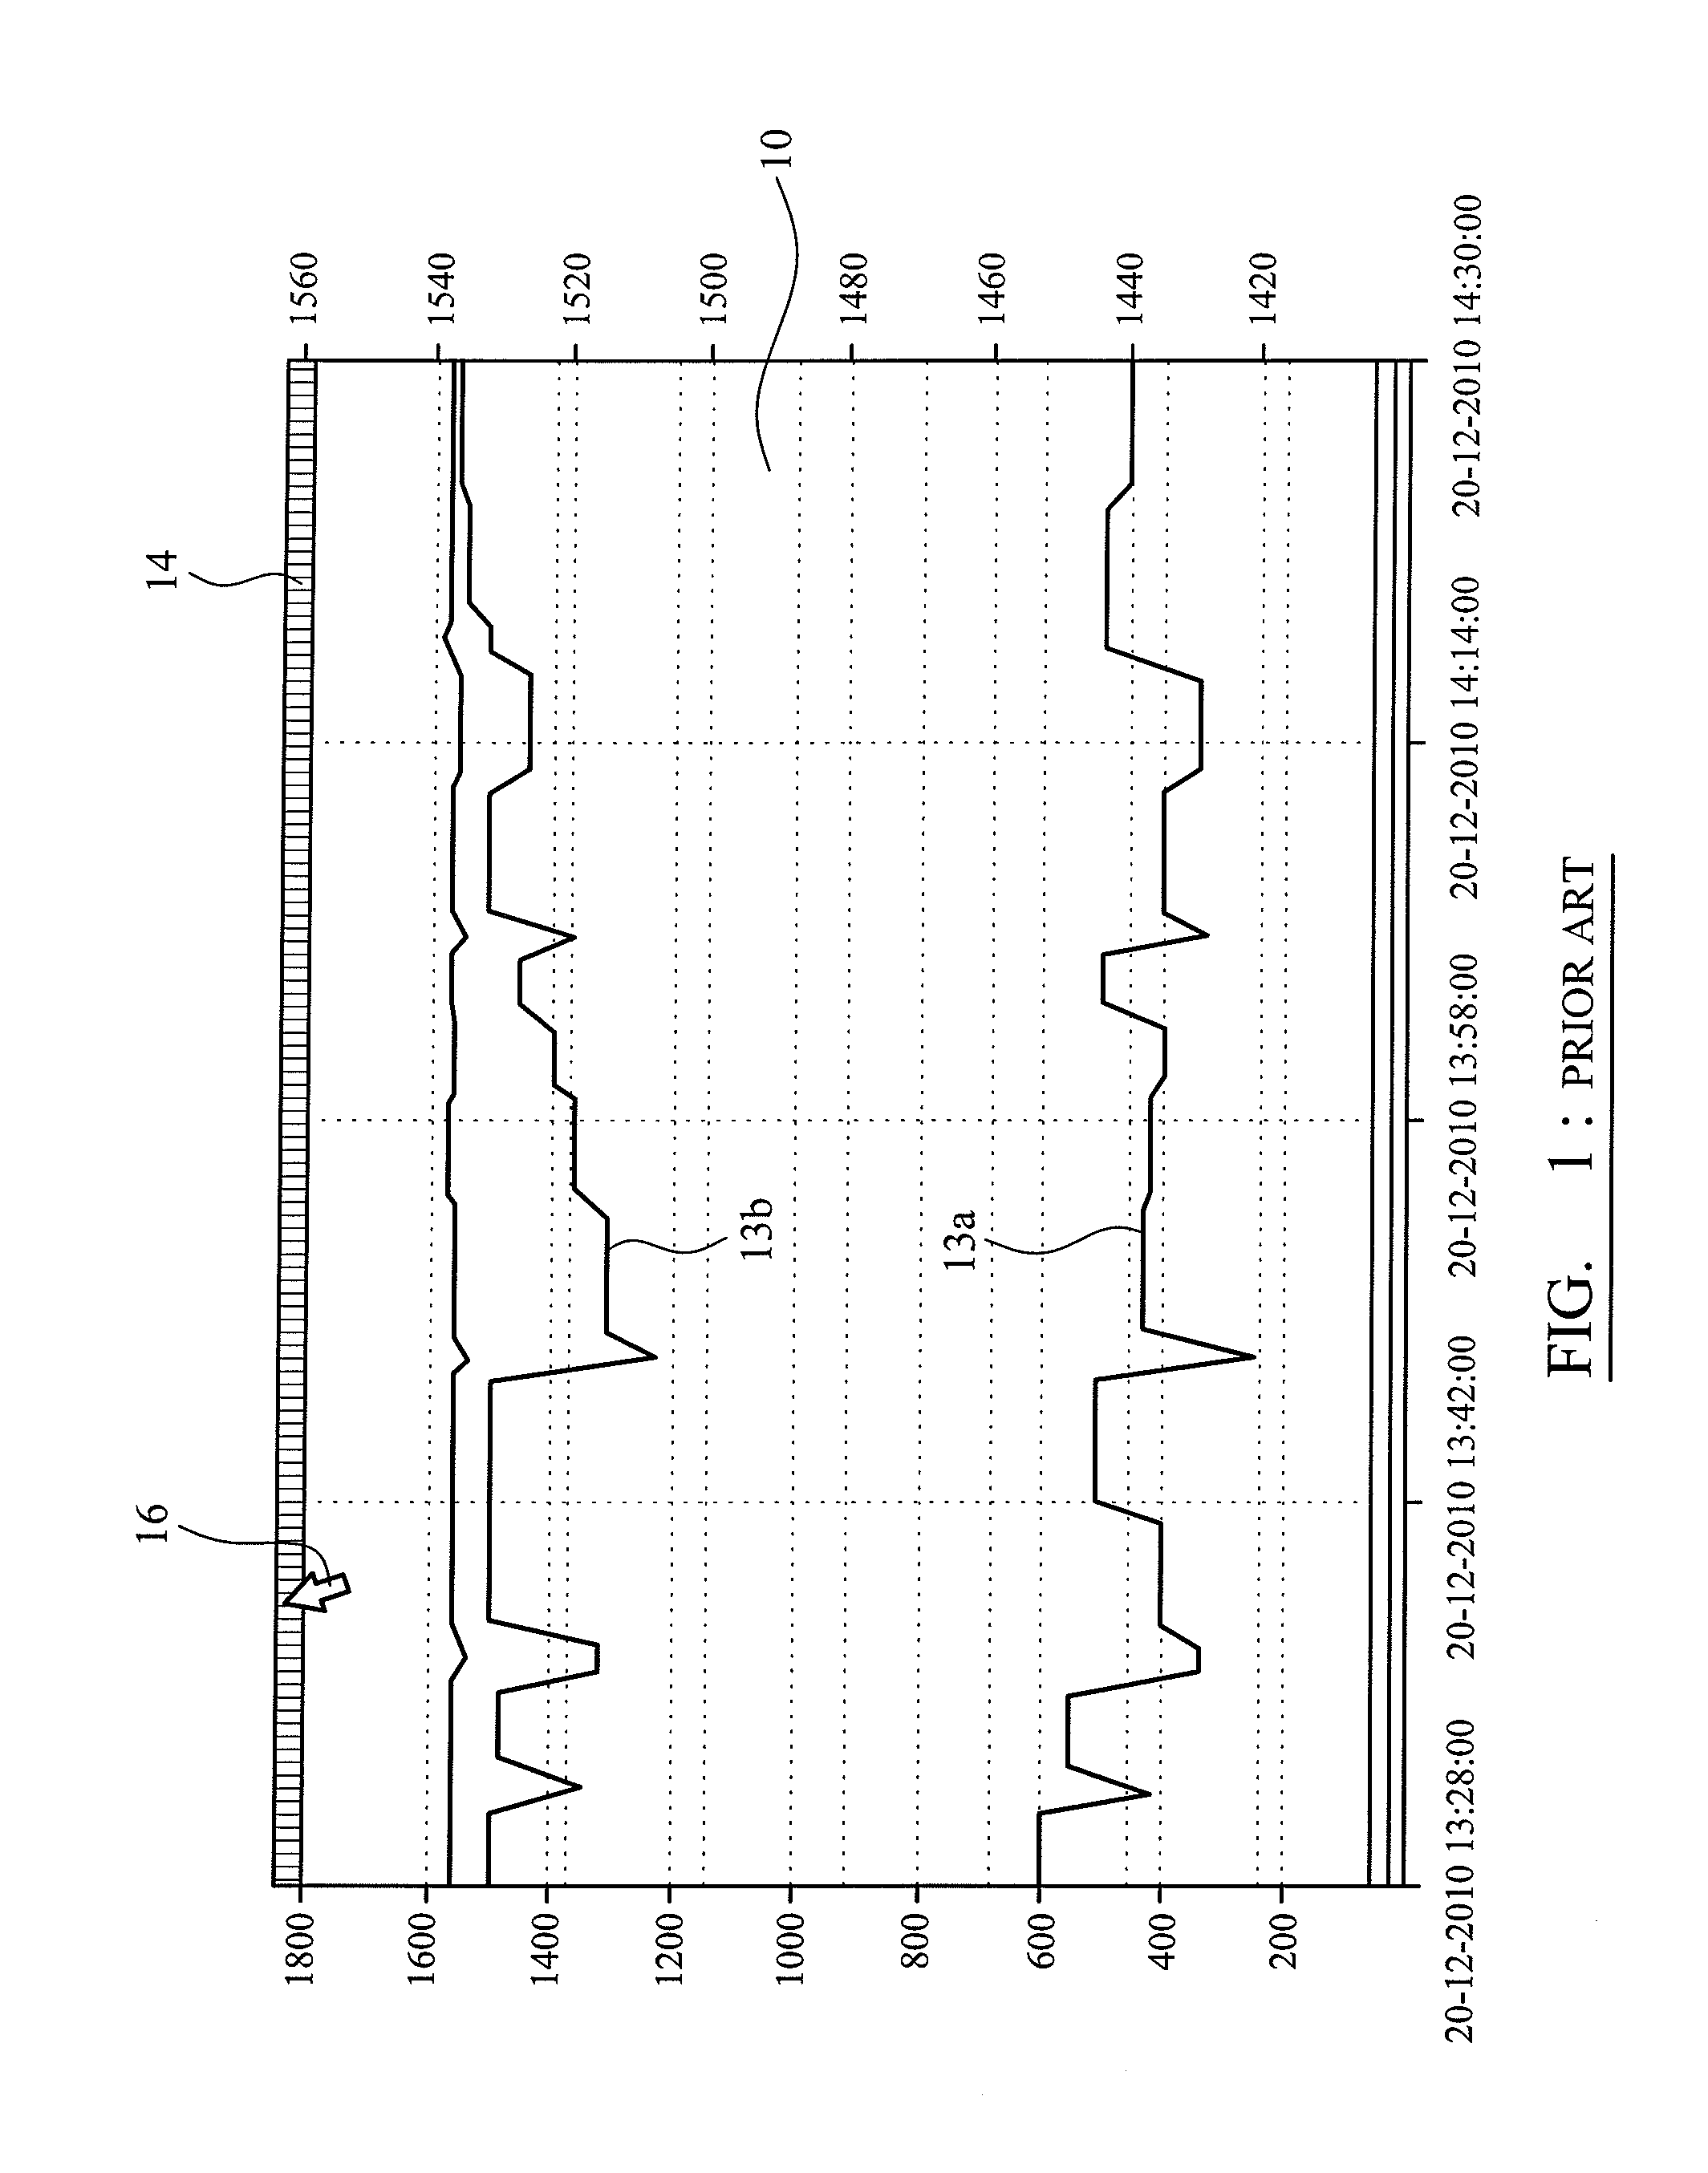 Apparatus and Method for Displaying Telemetry Data